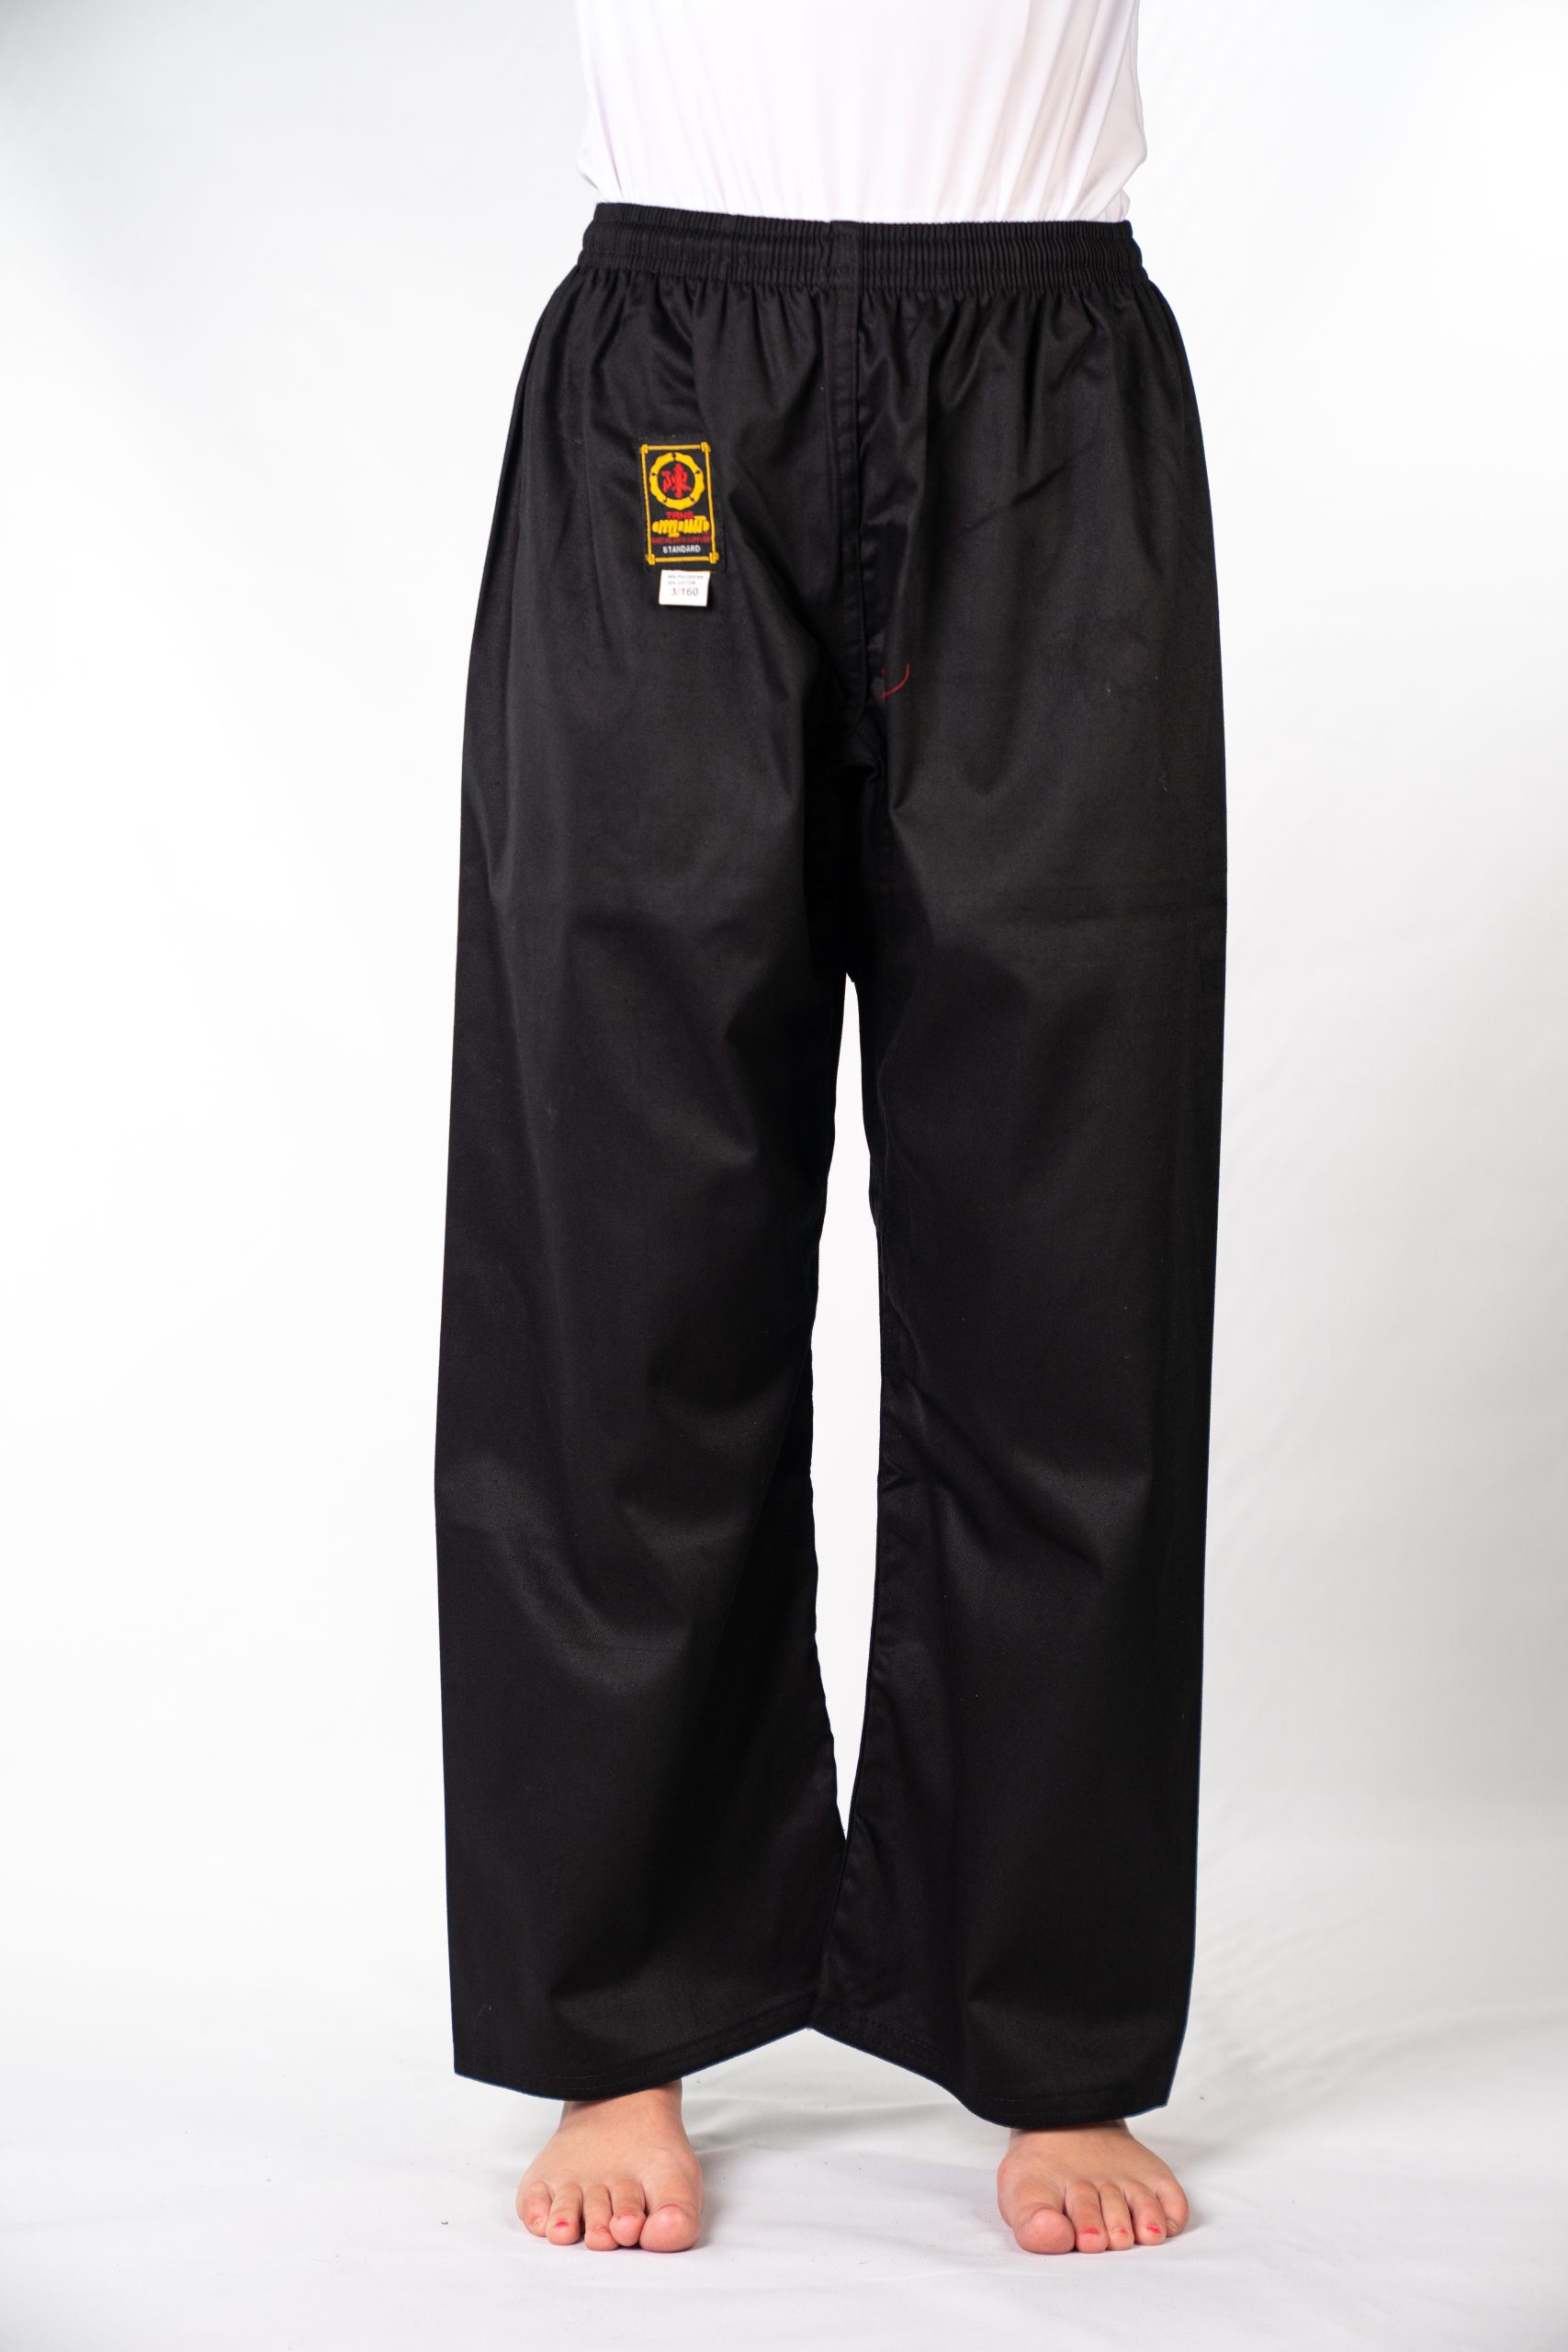 martialart pants black front scaled